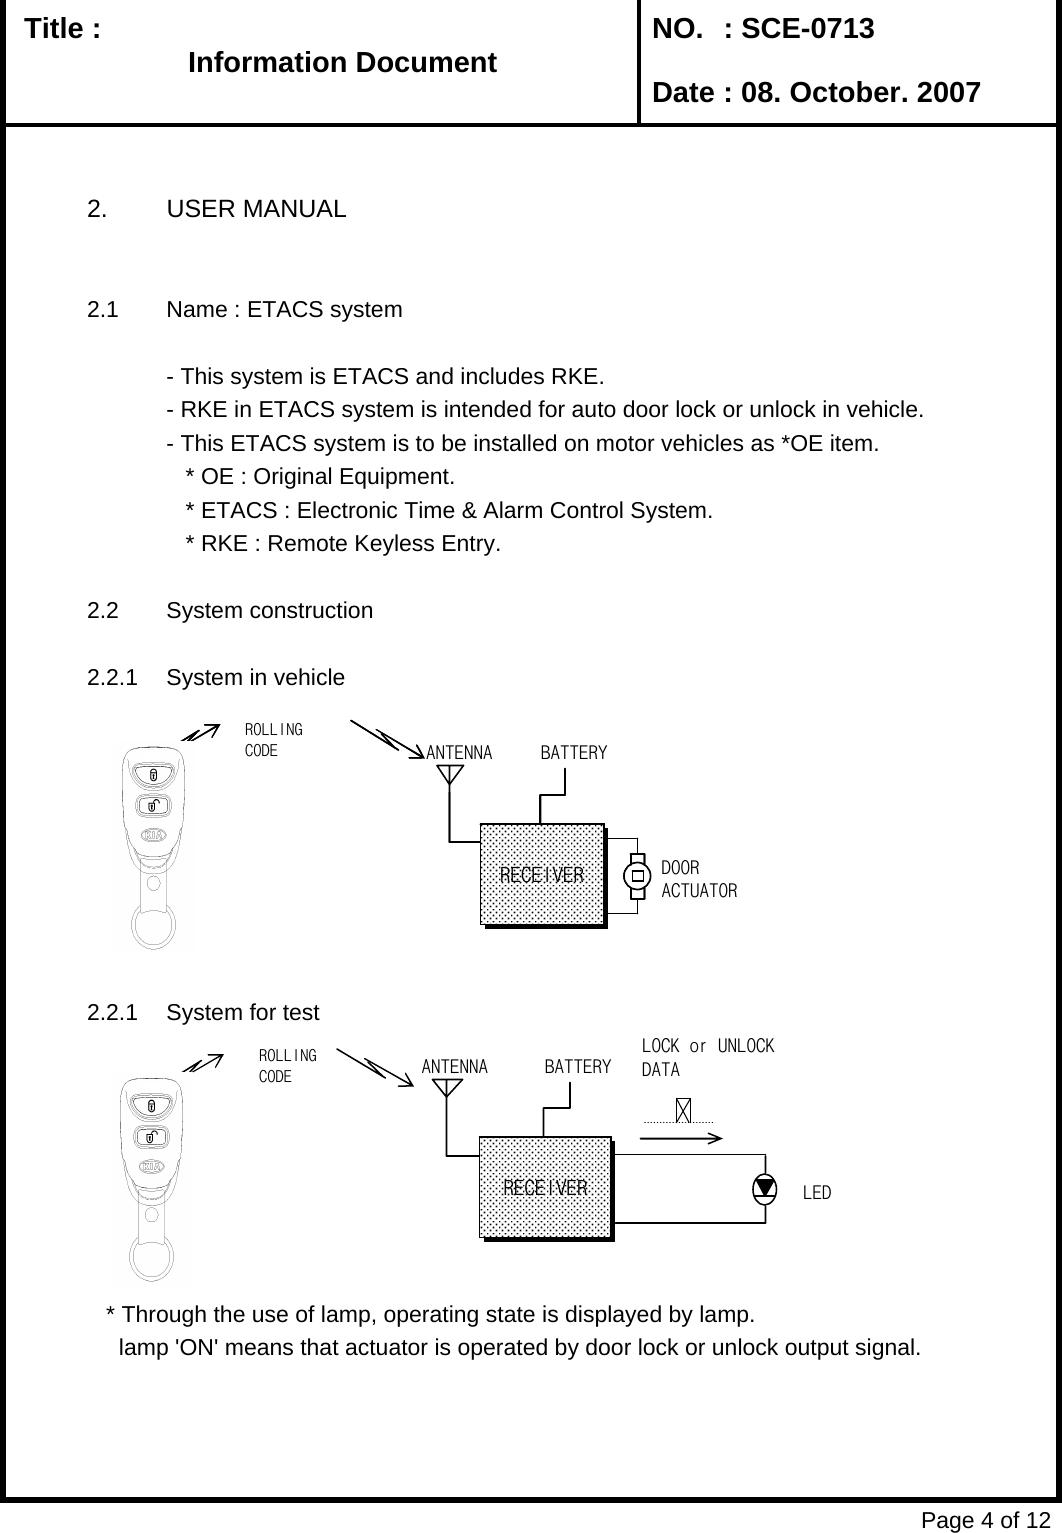   Title :  NO. : SCE-0713 Date : 08. October. 20072. USER MANUAL2.1 Name : ETACS system- This system is ETACS and includes RKE.- RKE in ETACS system is intended for auto door lock or unlock in vehicle.- This ETACS system is to be installed on motor vehicles as *OE item.     * OE : Original Equipment.   * ETACS : Electronic Time &amp; Alarm Control System.   * RKE : Remote Keyless Entry.2.2 System construction2.2.1 System in vehicle2.2.1 System for test   * Through the use of lamp, operating state is displayed by lamp.     lamp &apos;ON&apos; means that actuator is operated by door lock or unlock output signal. Page 4 of 12Information DocumentInformation DocumentInformation DocumentInformation DocumentANTENRECEIVERBATTERYDOORACTUATORROLLINGANTENNARECEIVERBATTERYDOORACTUATORROLLINGCODEANTENNARECEIVERBATTERYLOCK or UNLOCKDATALEDROLLINGCODE